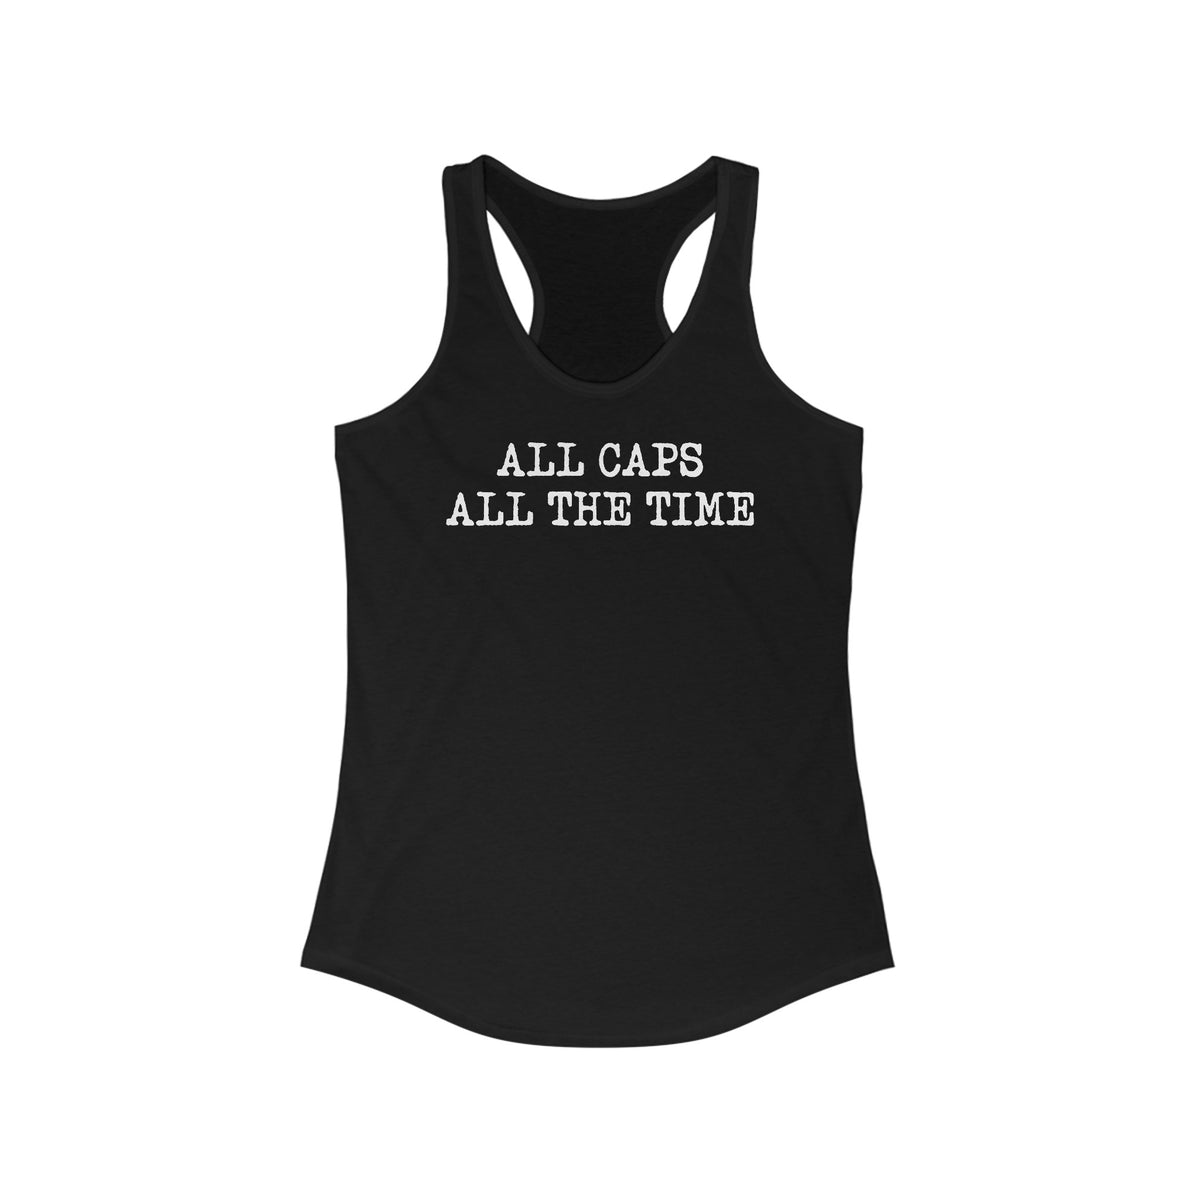 All Caps All The Time - Women's Racerback Tank